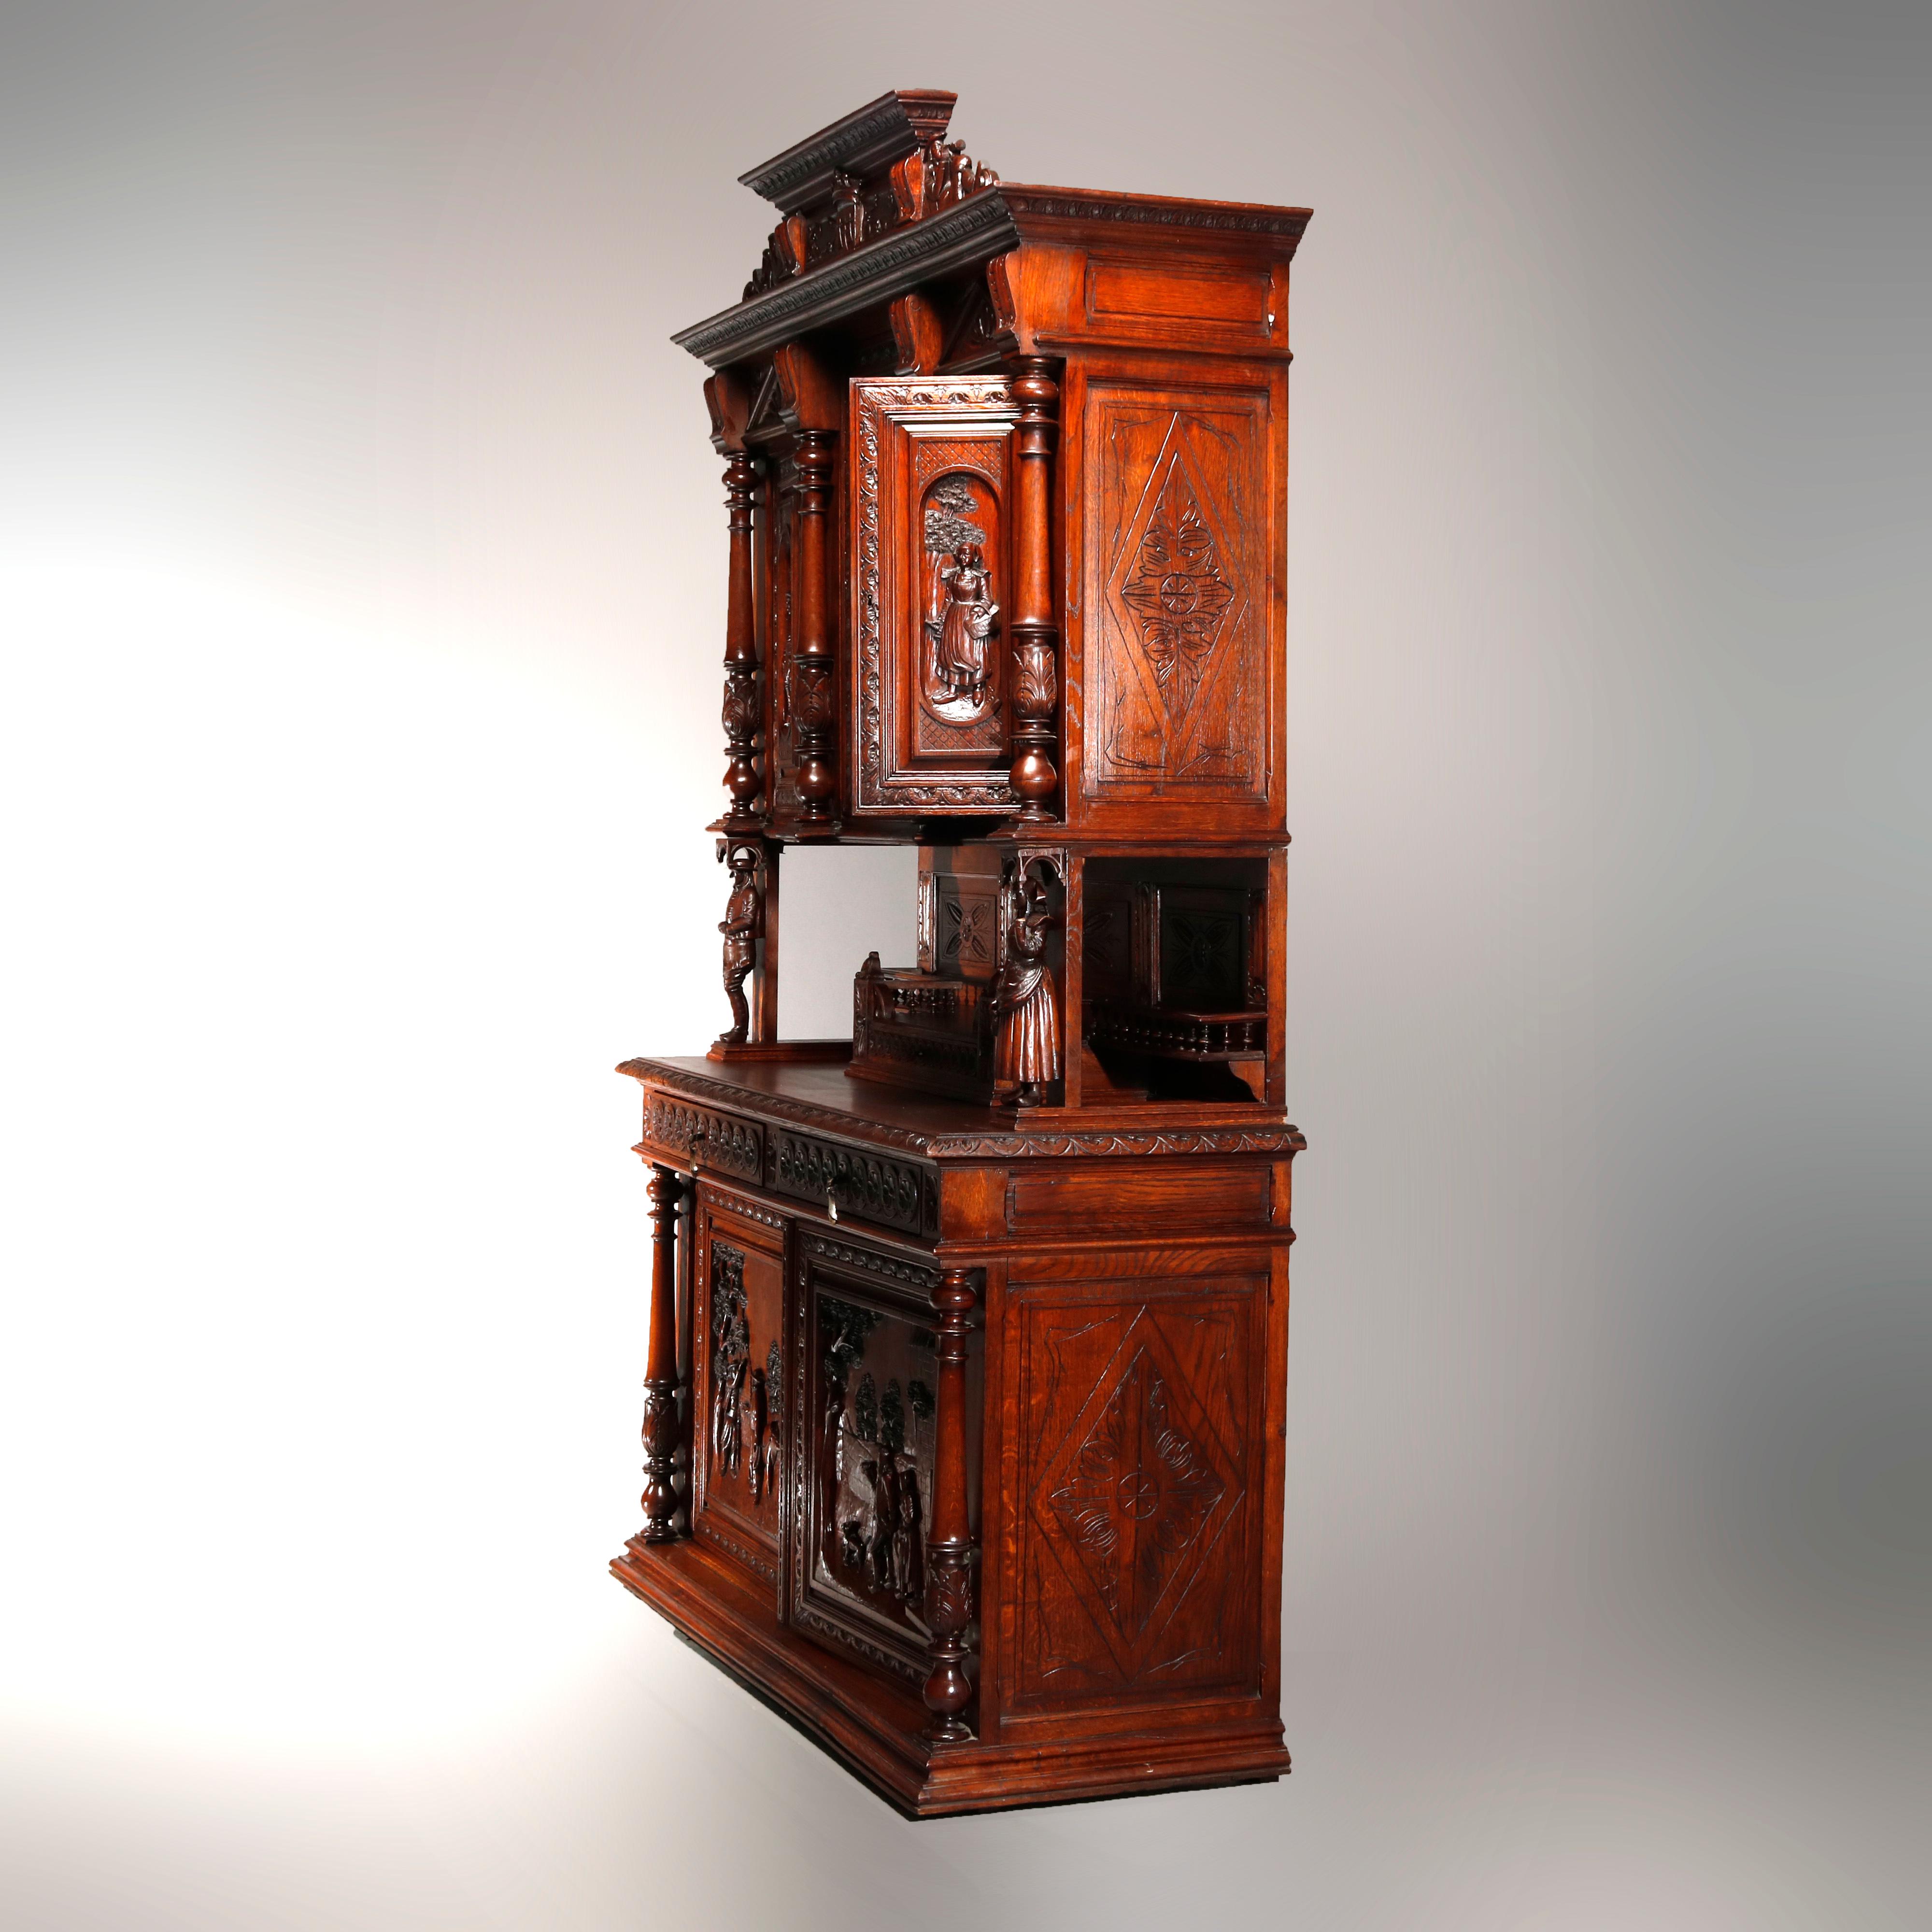 An antique Continental figural hunt or court cupboard offers oak construction with deeply carved panels depicting genre scenes, crest having crown and flanking musicians over triple door cabinet with lower gallery having carved foliate elements,